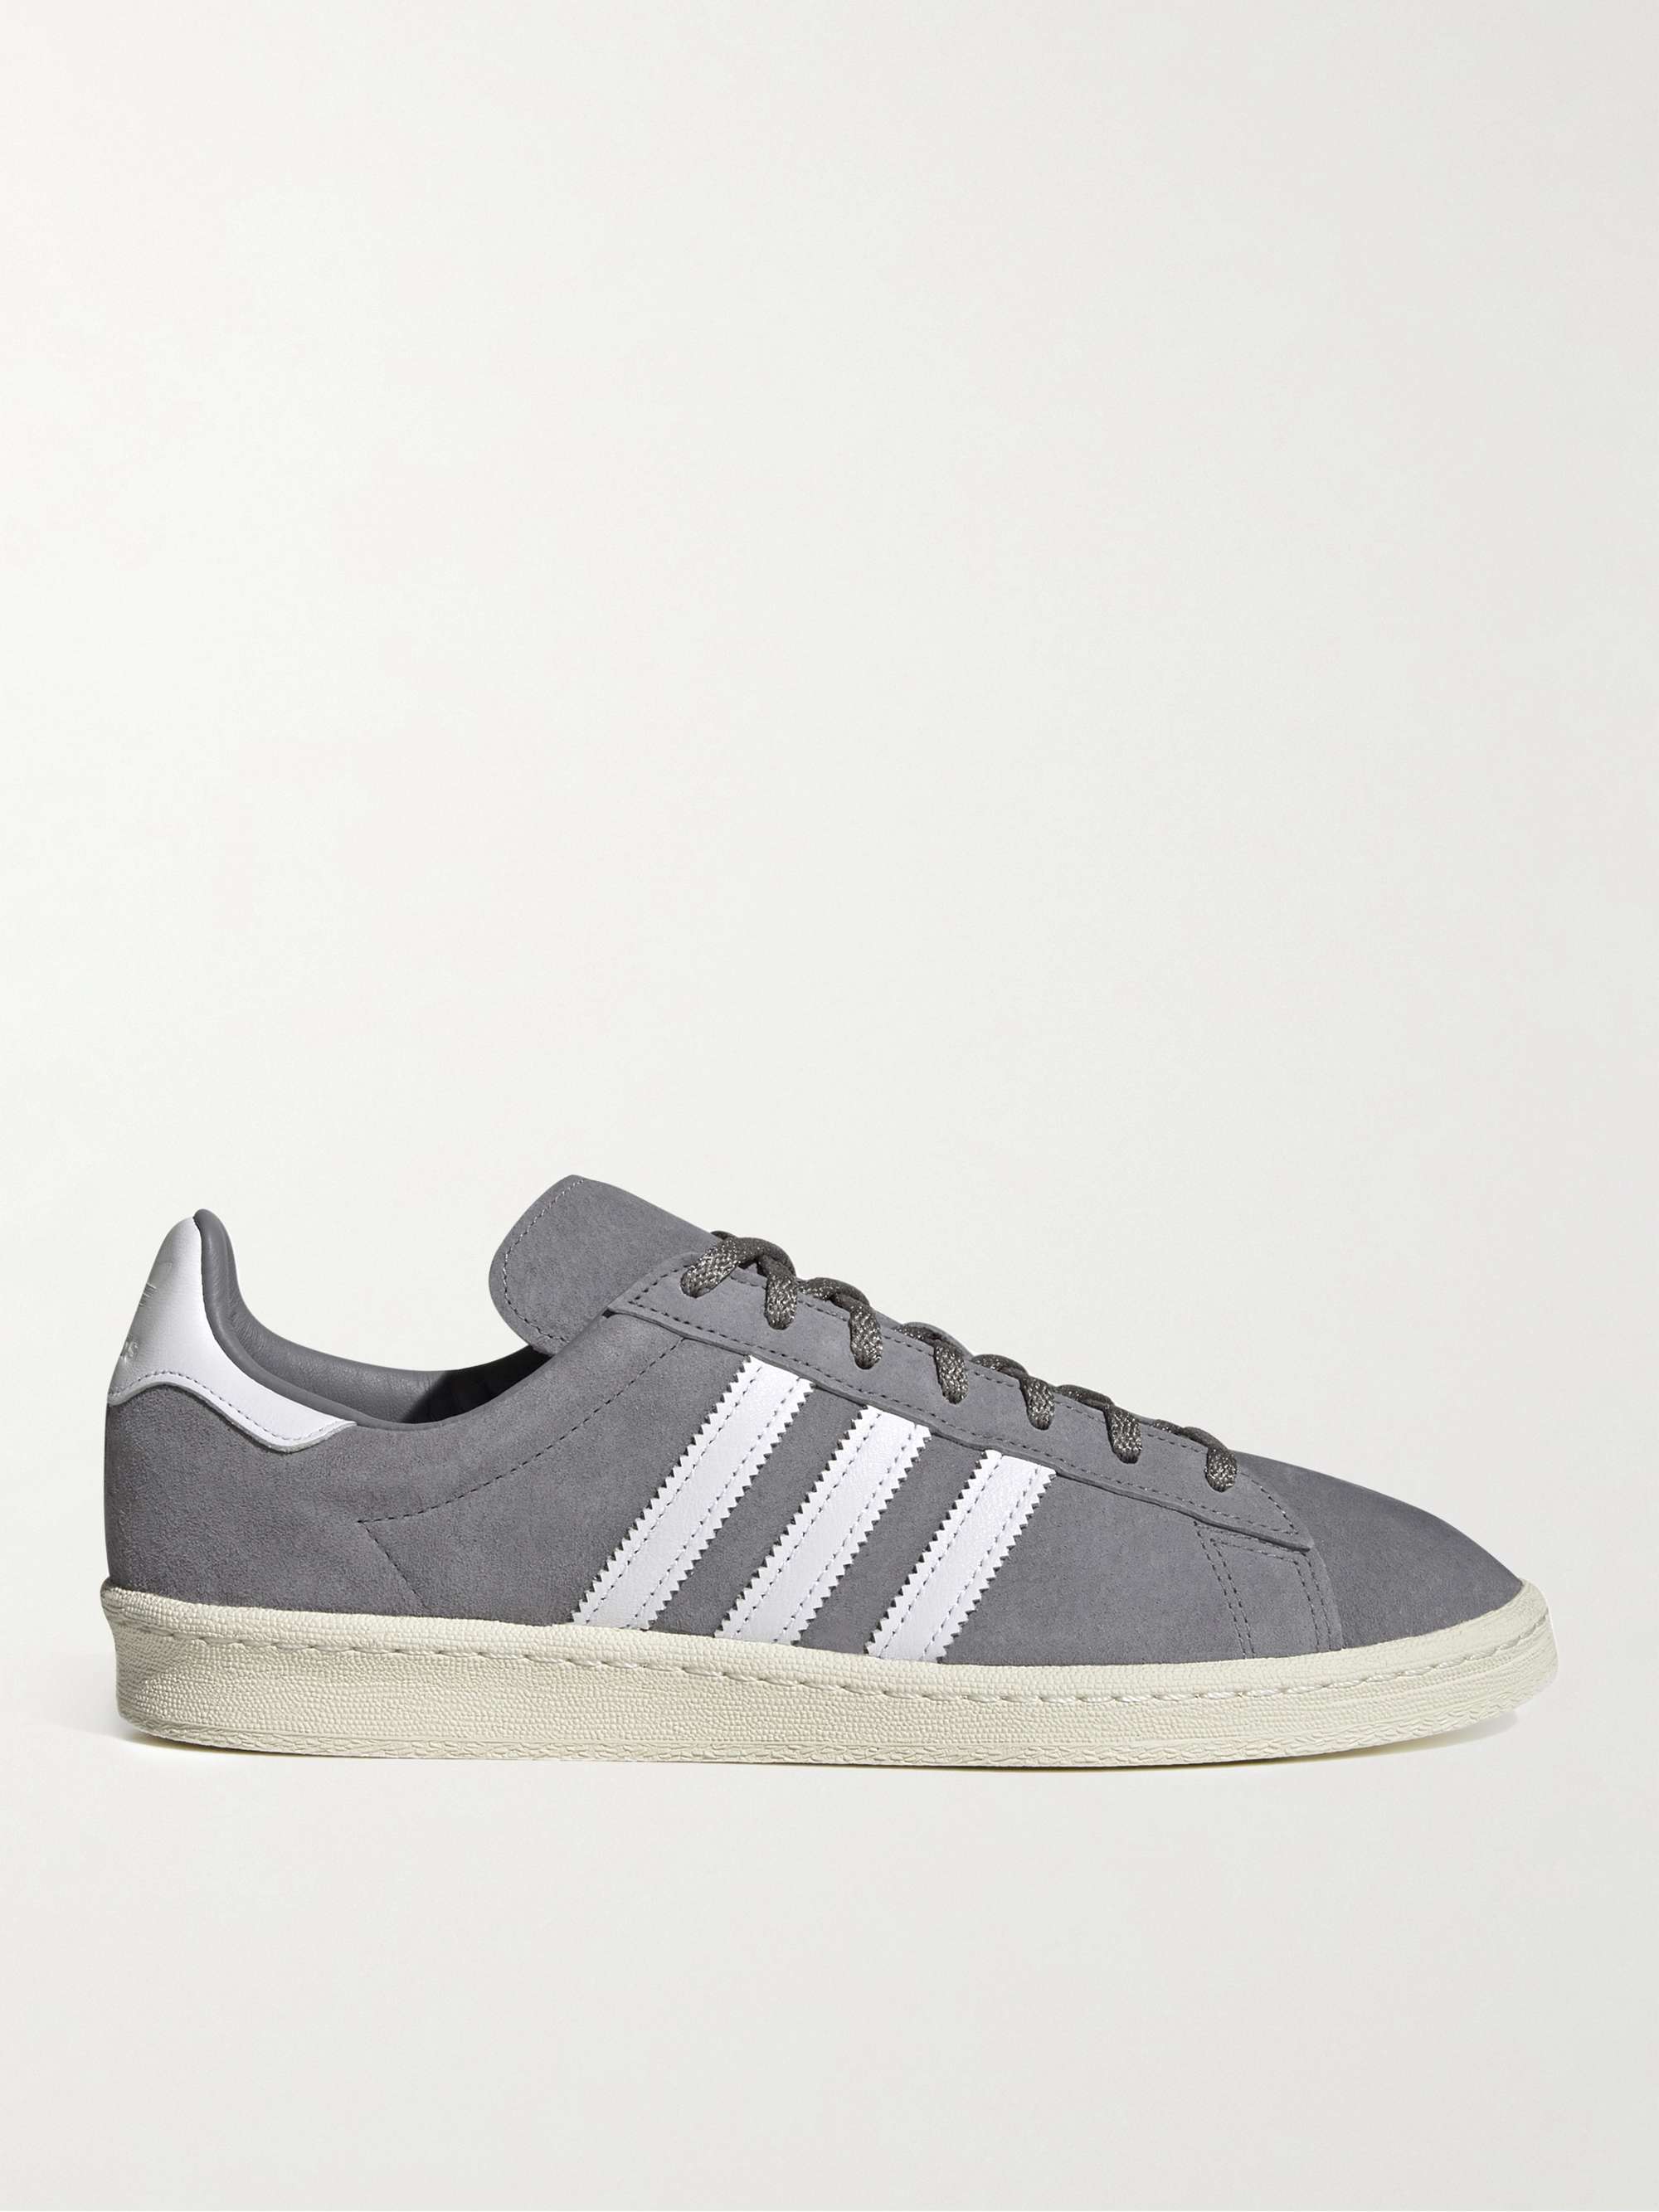 ADIDAS ORIGINALS Campus 80s Leather-Trimmed Suede Sneakers | MR PORTER